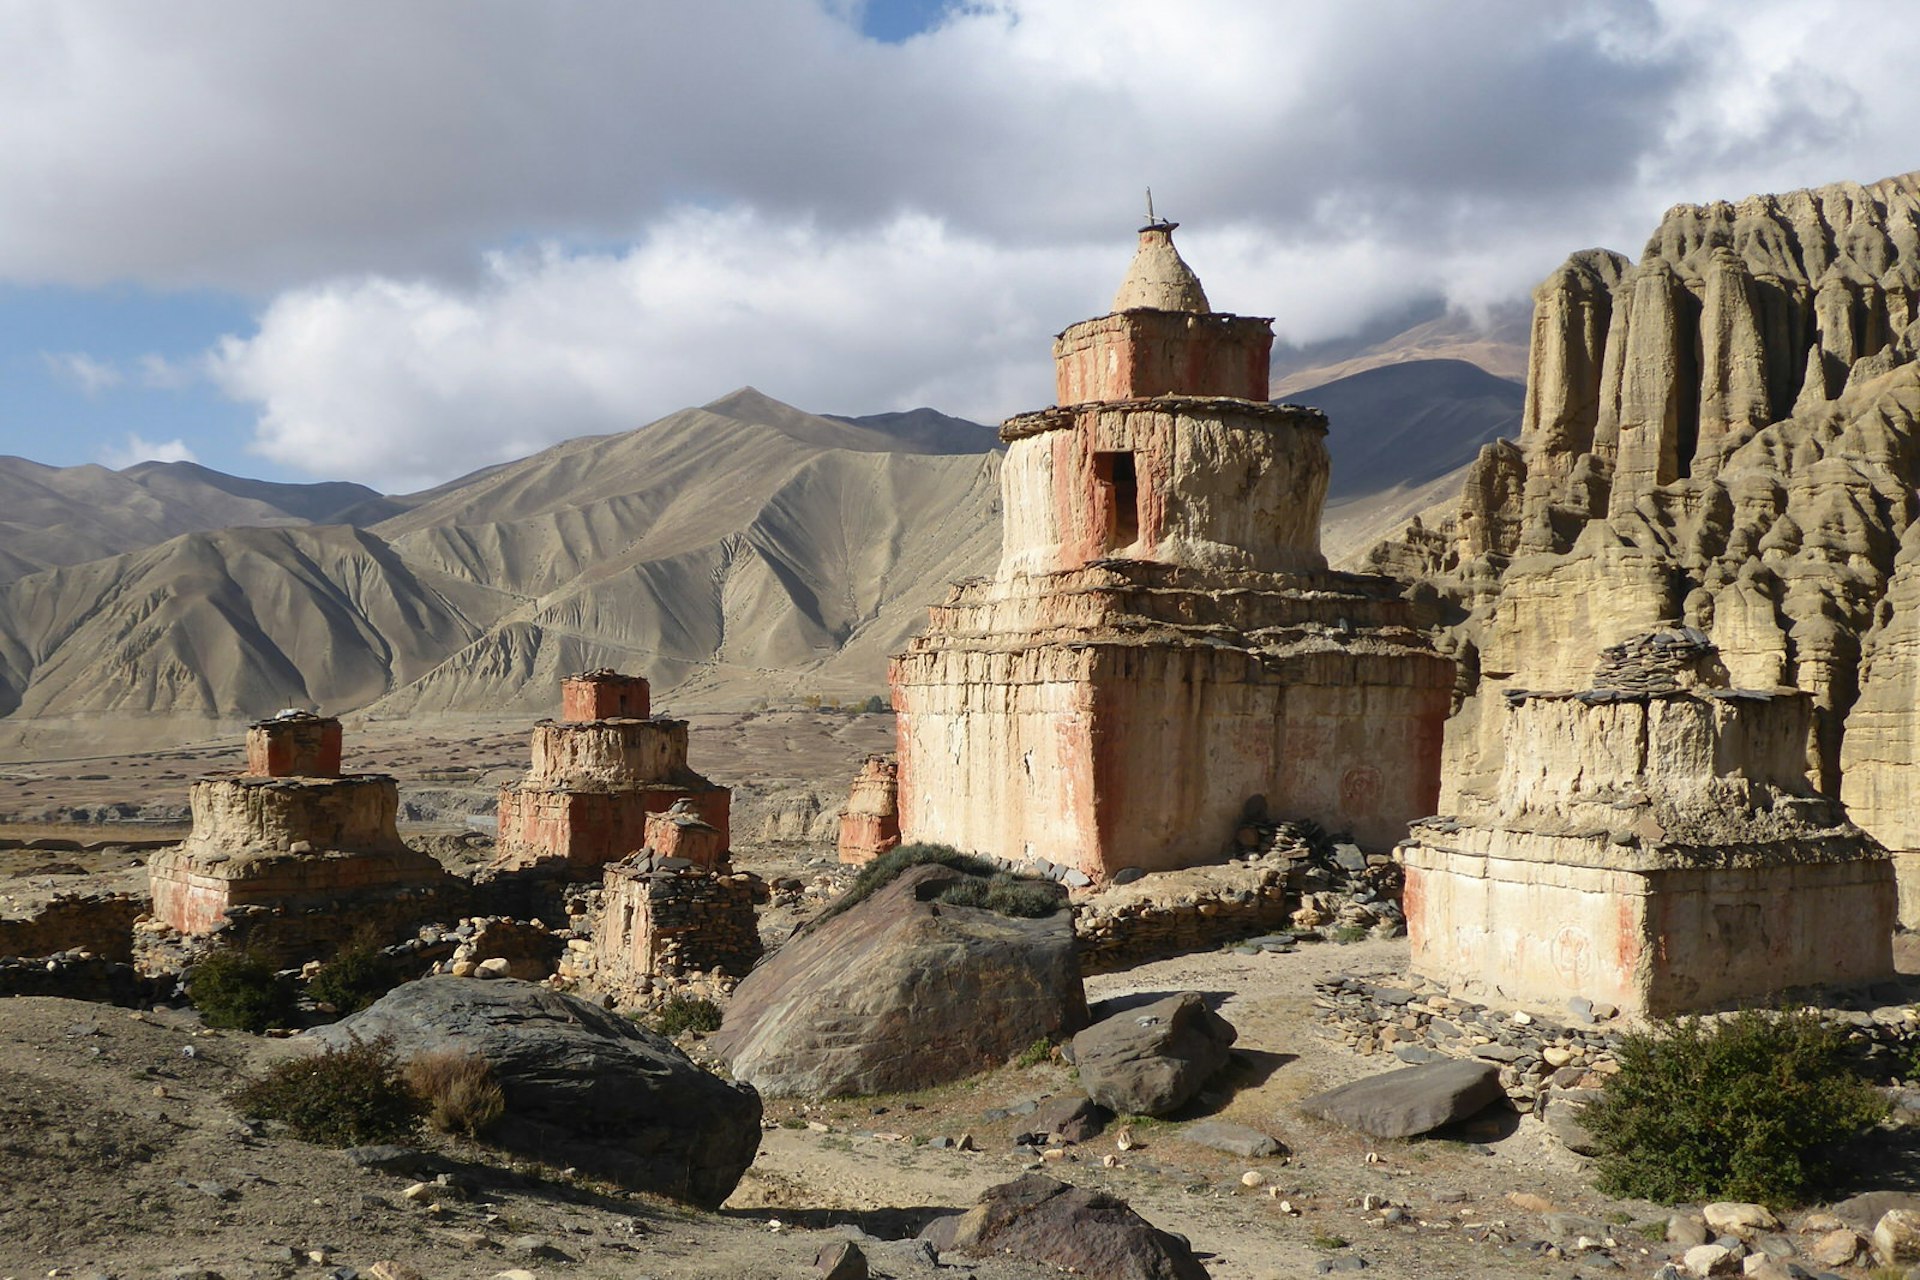 Ancient chortens marking the old salt trade route through Mustang